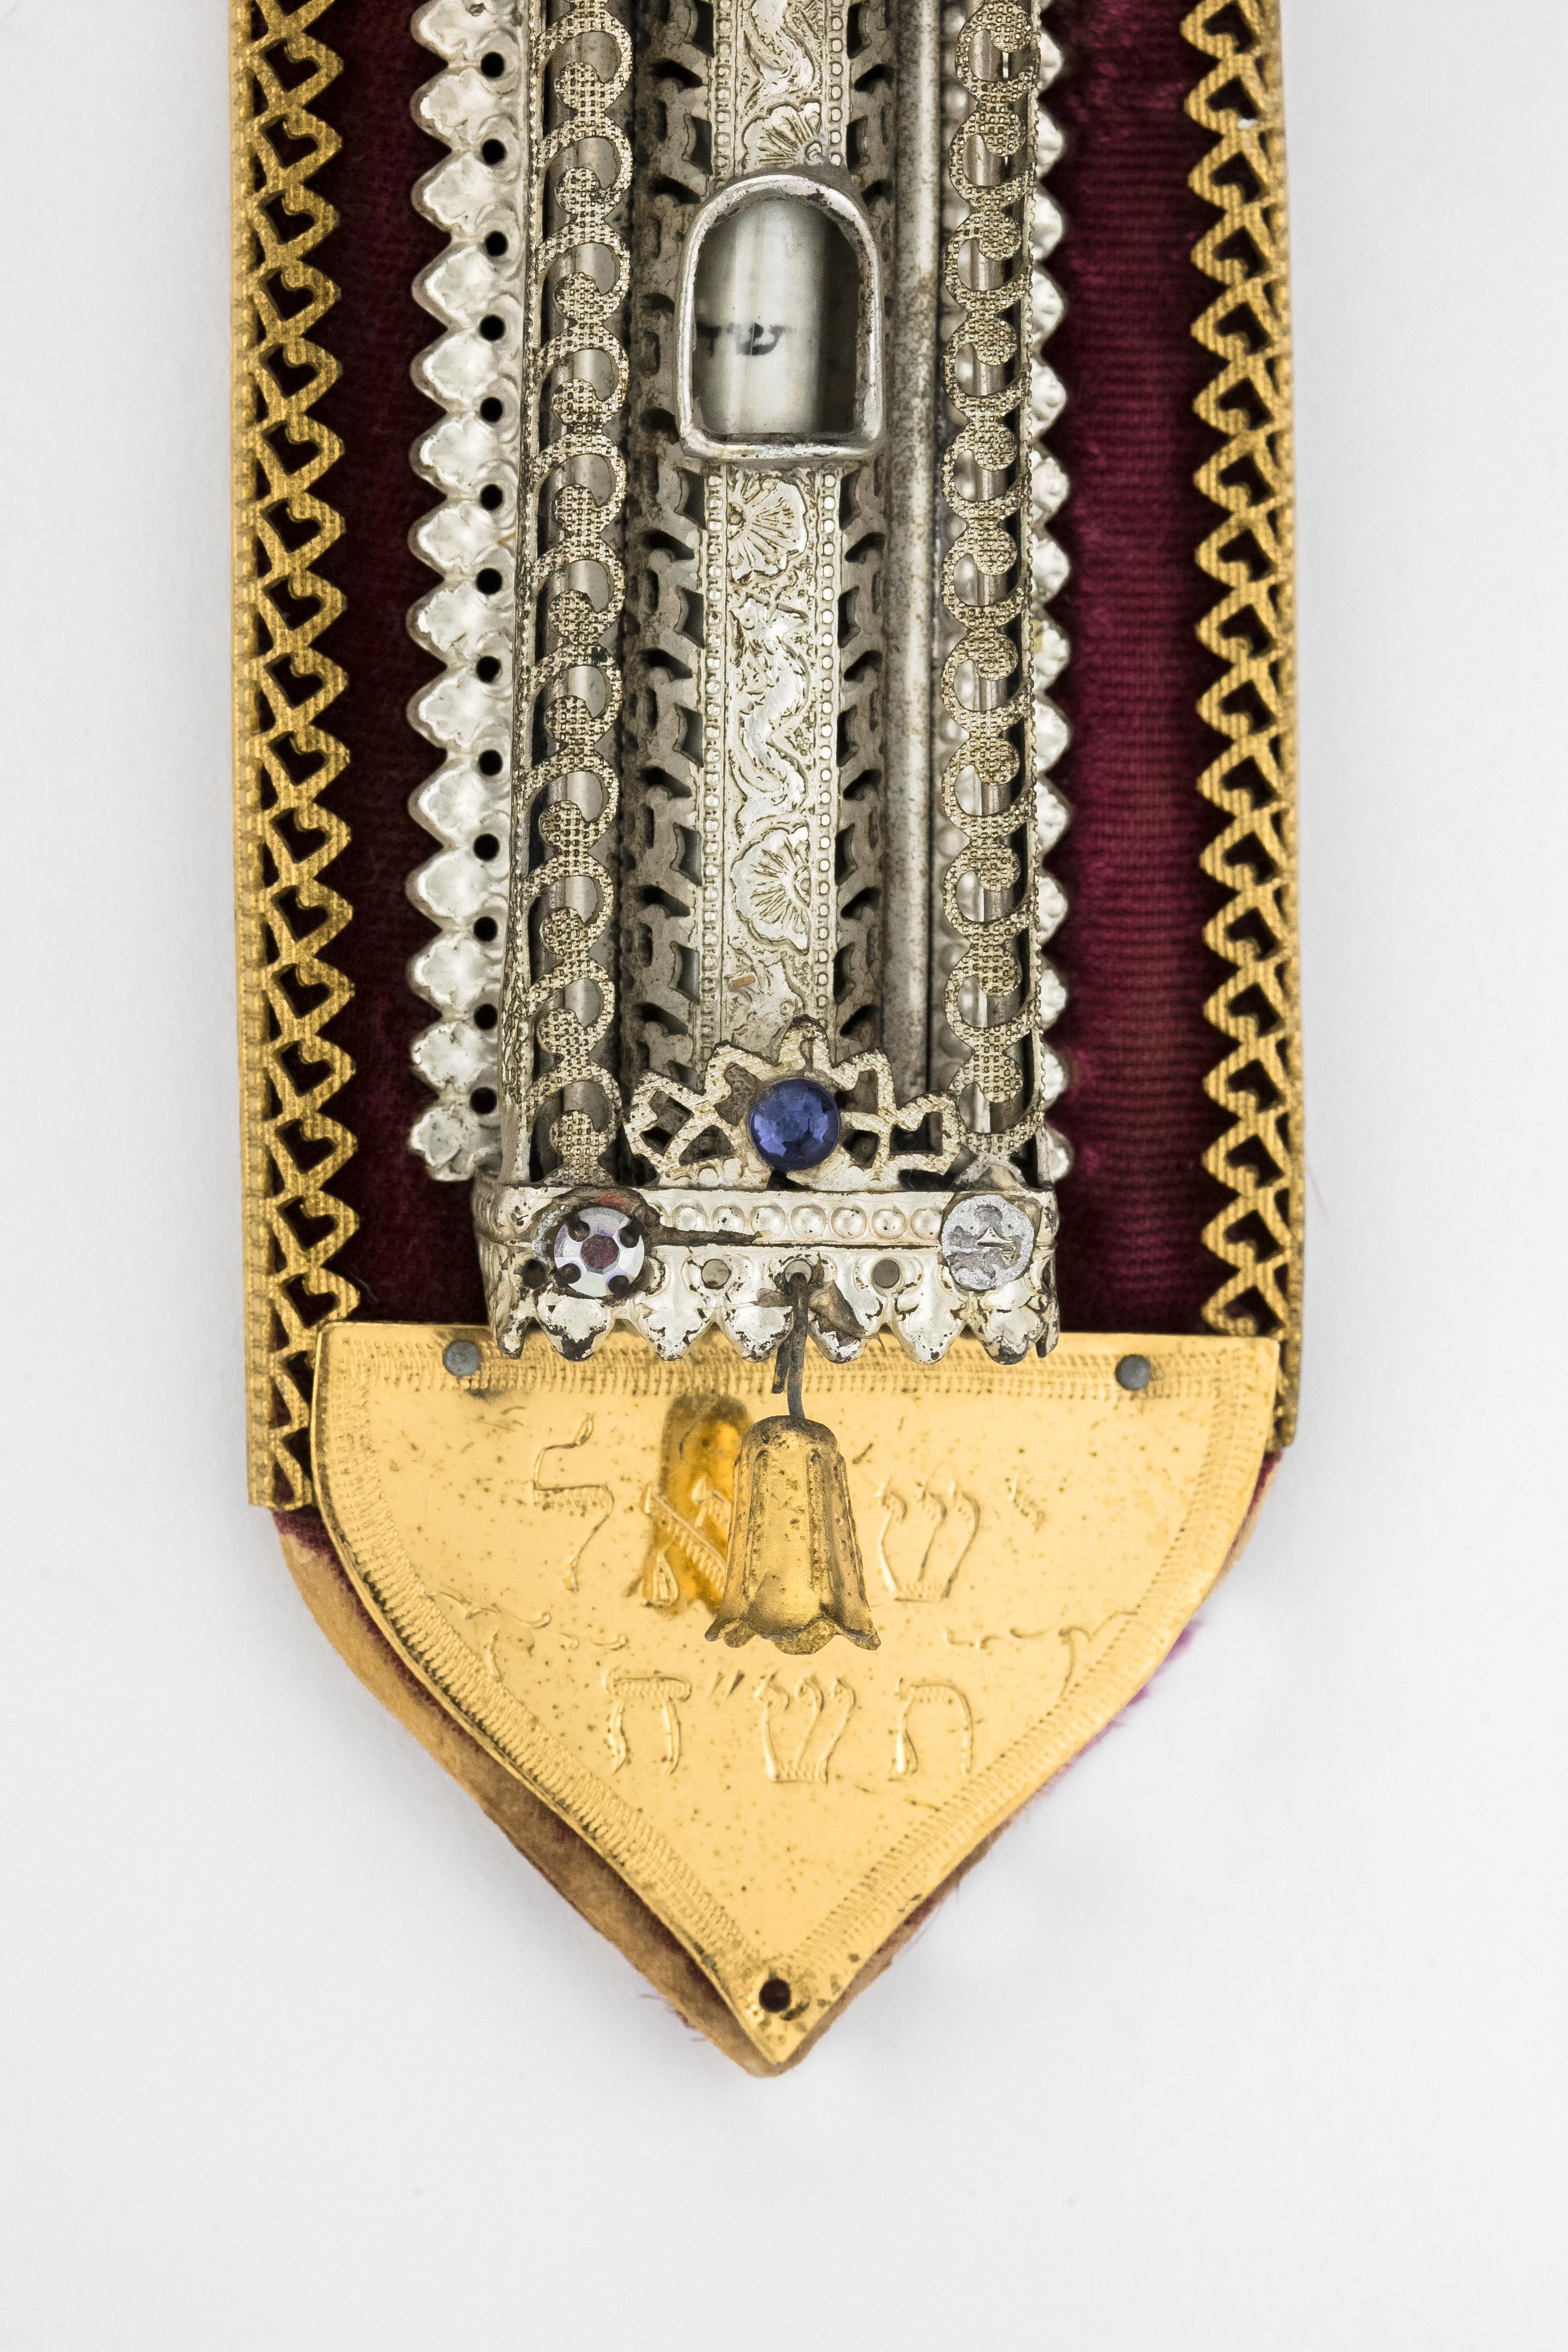 Early Israeli Mezuzah on velvet mounting with ornate silvered body, and with gilded top and base. Decorated with colored glass and with gilded bell hanging from the lower part of the Mezuzah. 
Engraved in Hebrew “Israel 1948” at base.
The Mezuzah is